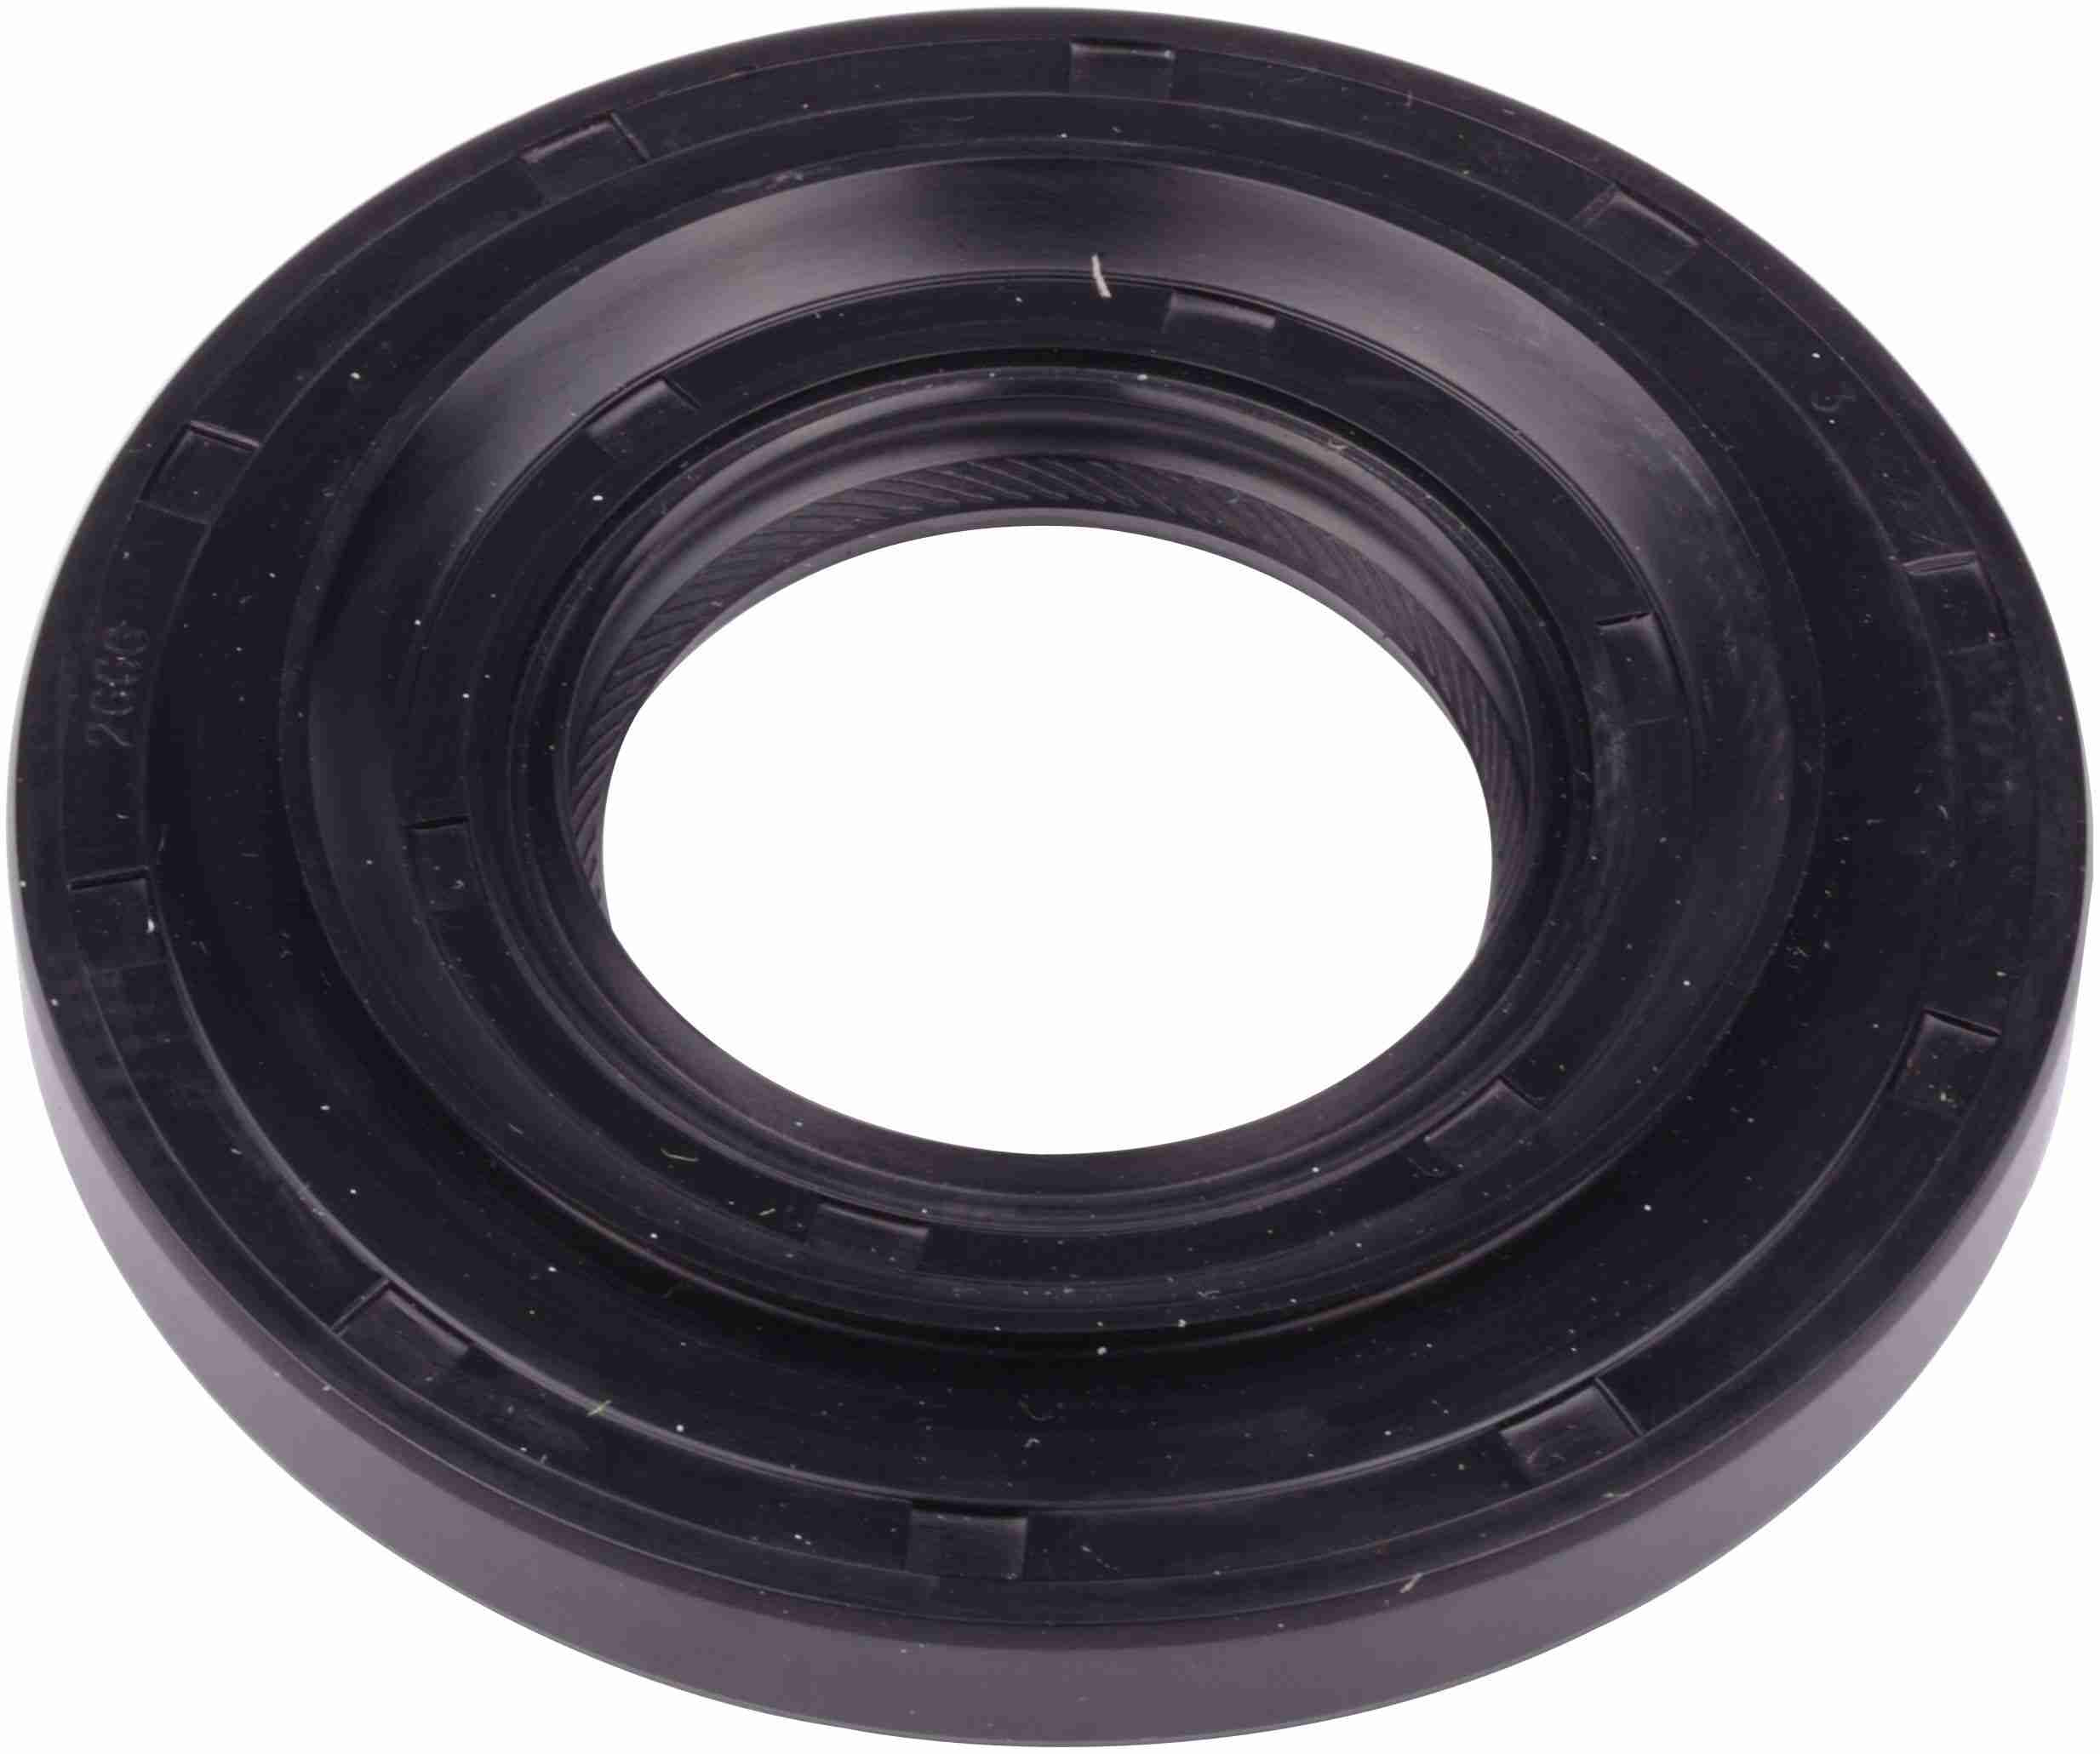 SKF Automatic Transmission Output Shaft Seal  top view frsport 13849